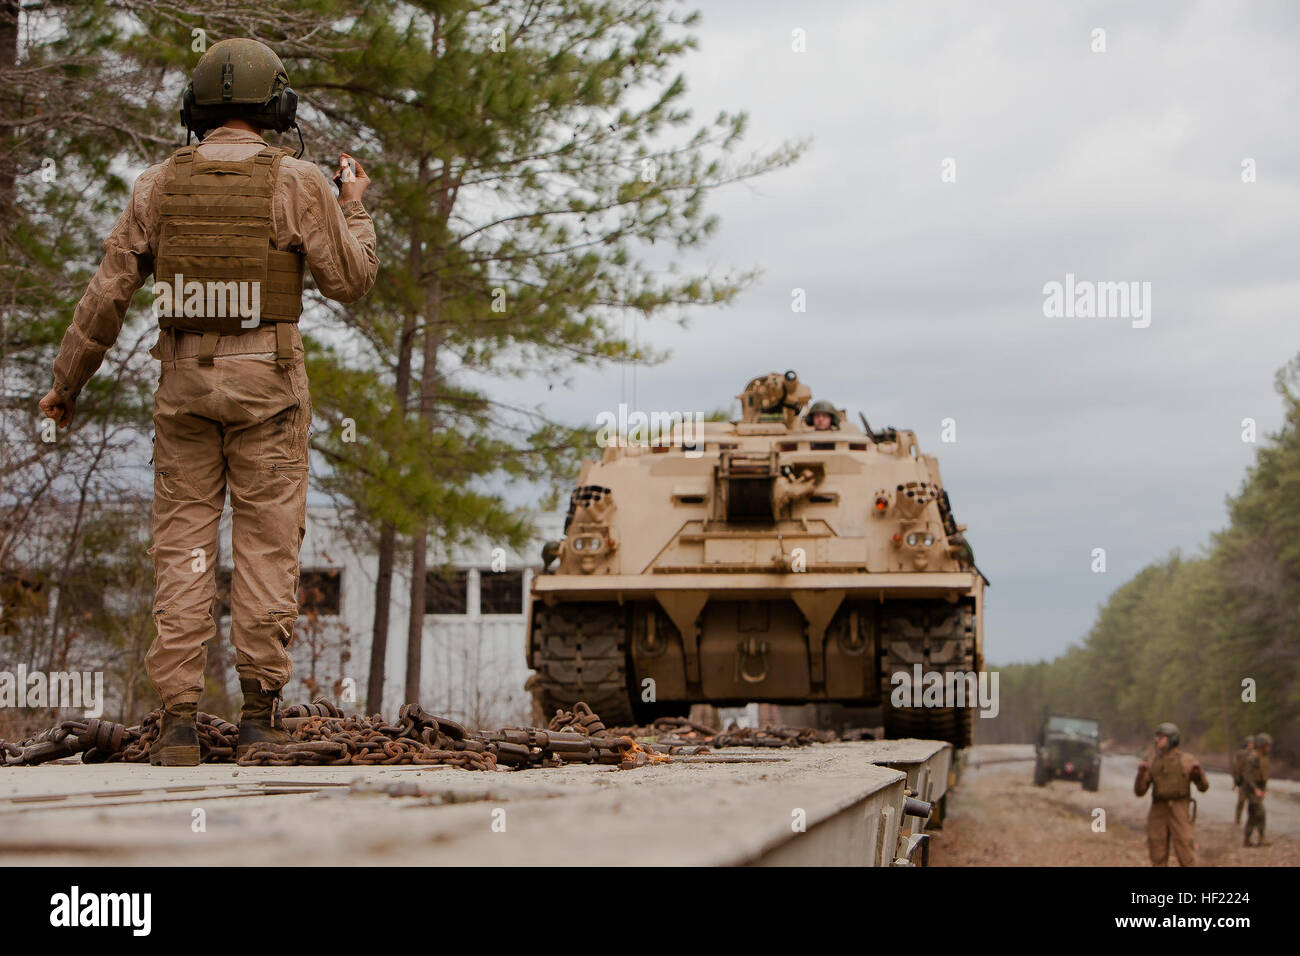 U.S. Marine Corps Cpl. Ryan Goetts, a vehicle commander, 2nd Tank Battalion, 2nd Marine Division, ground guides an M88 A2 Hercules Recovery Vehicle off railcars during a Deployment for Training (DFT) Exercise at Fort Pickett, Va., March 28, 2014. The DFT is conducted to strengthen the unit's proficiency in a combat environment.  (U.S. Marine Corps photo by Lance Cpl. Kelly Timney, 2nd MarDiv, Combat Camera/Released) 2nd Tank Battalion Deployment for Training Exercise (DFT) 140328-M-OU200-249 Stock Photo